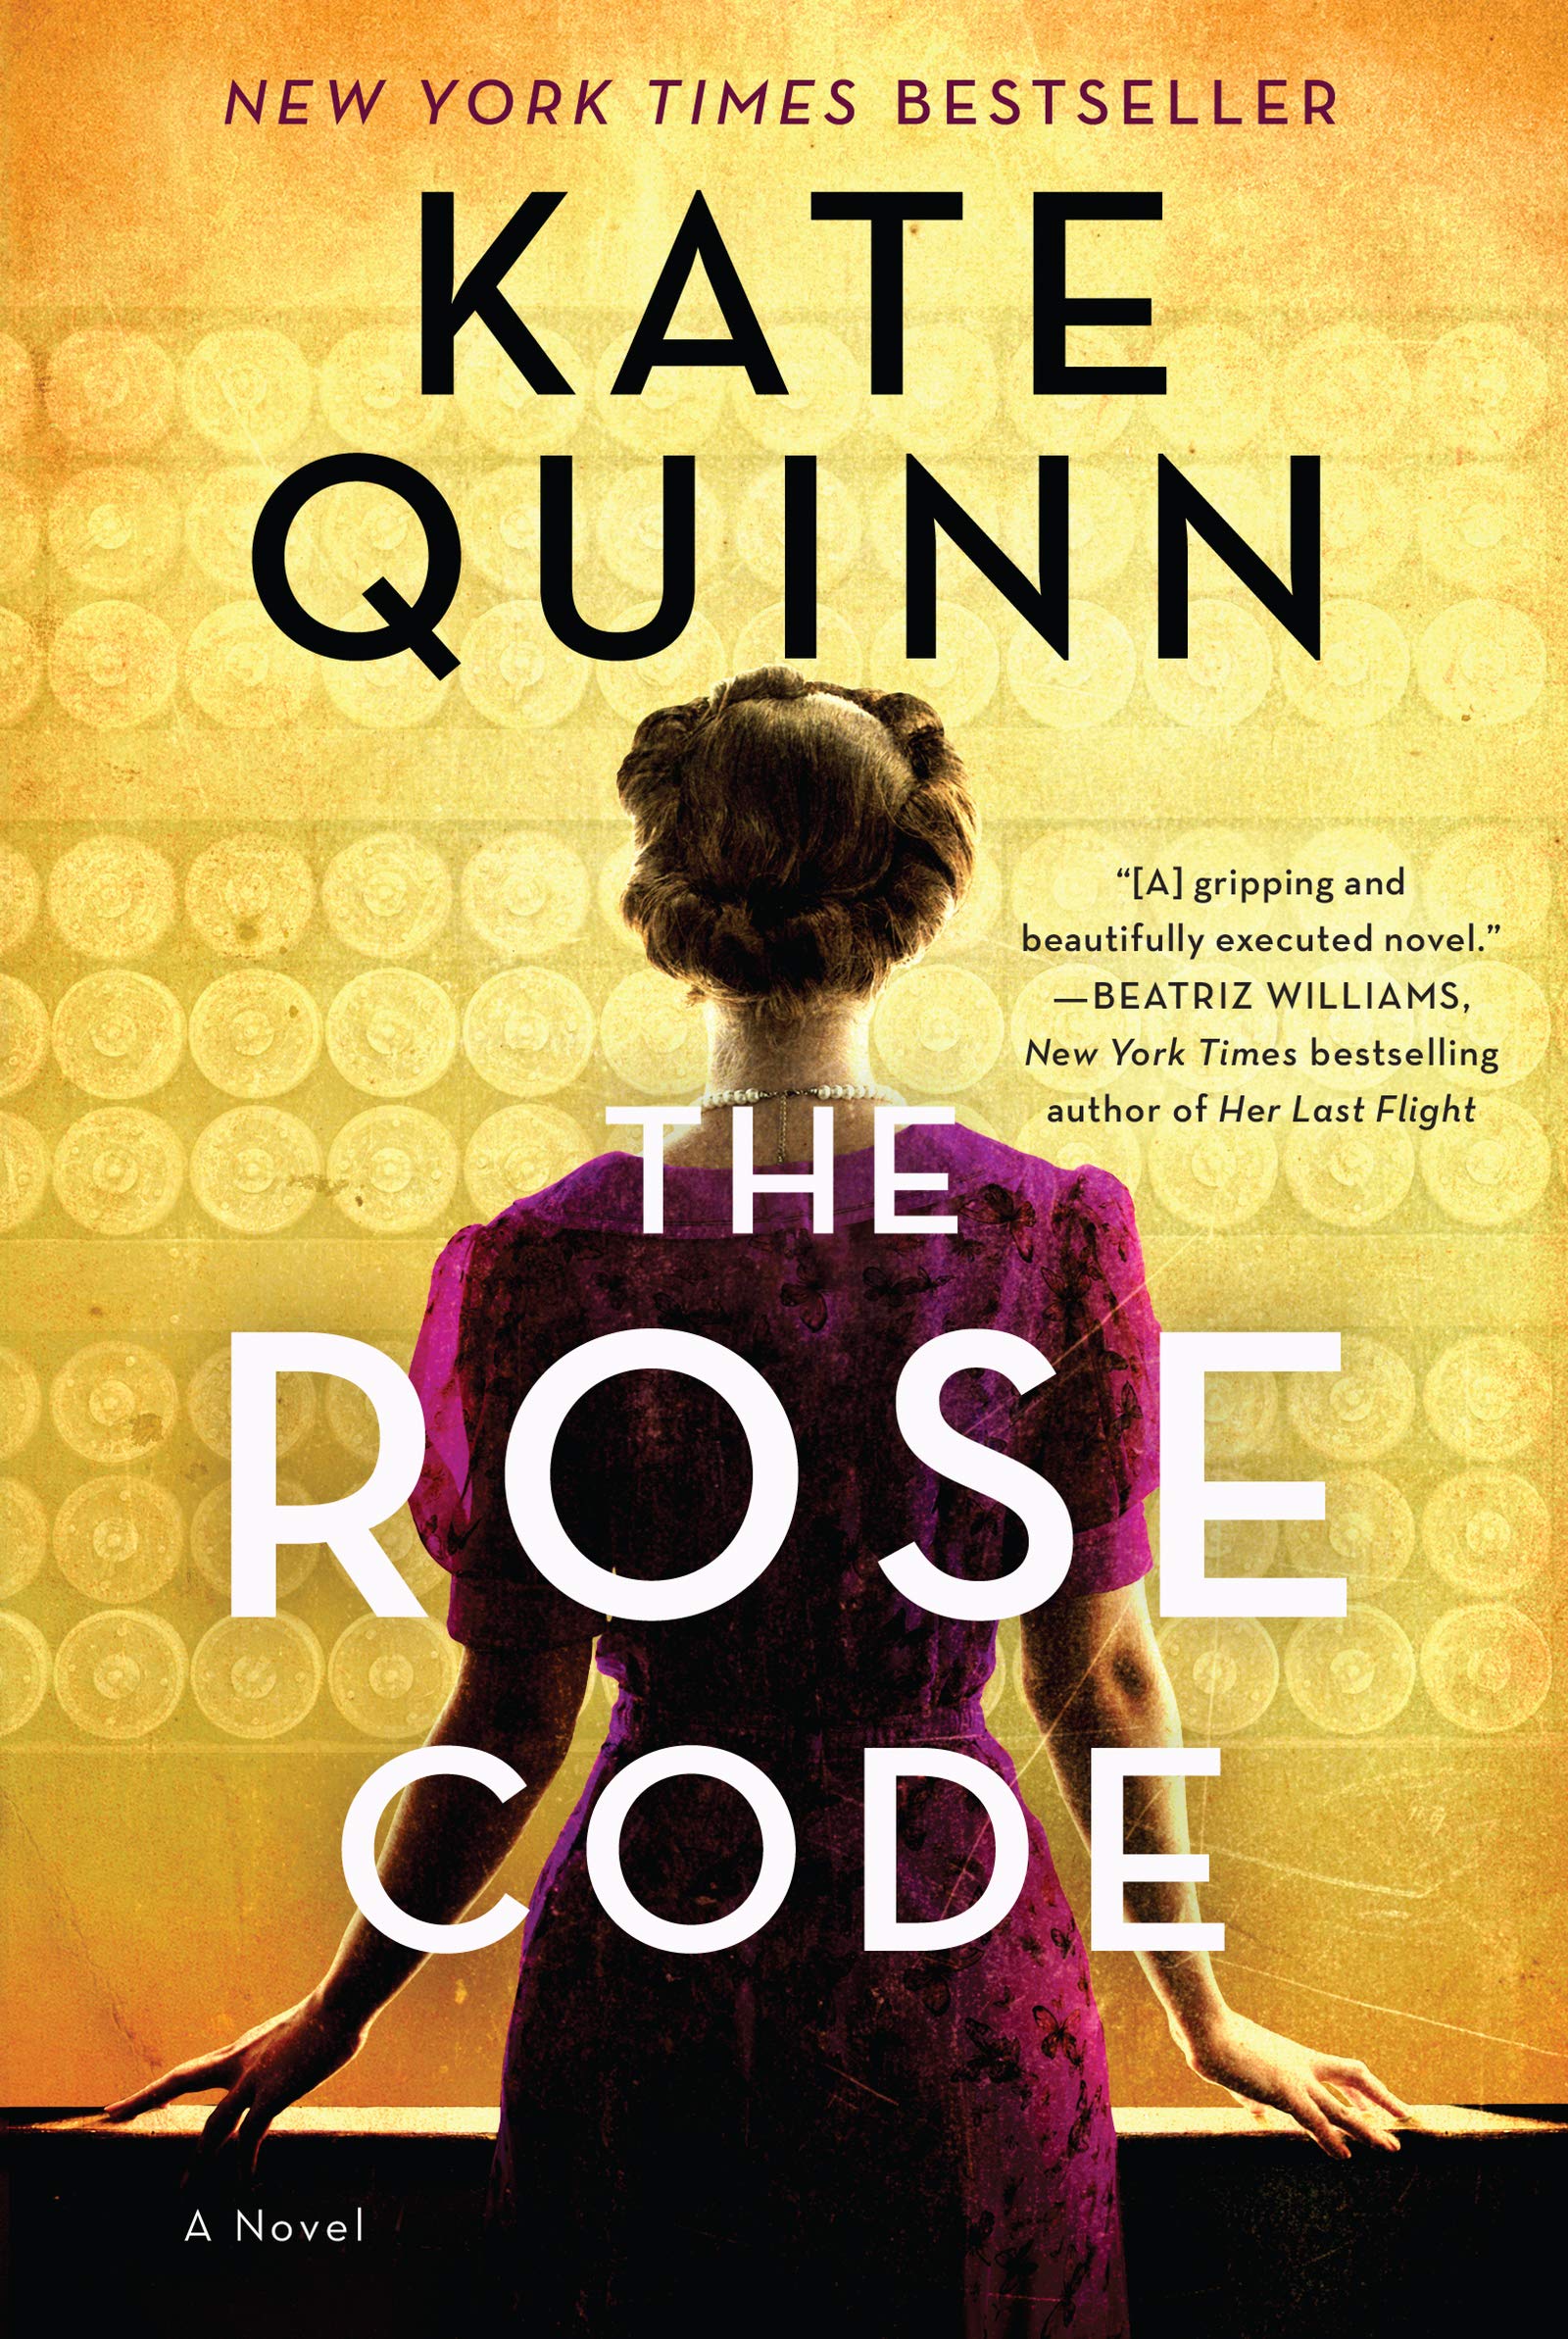 Image for "The Rose Code"